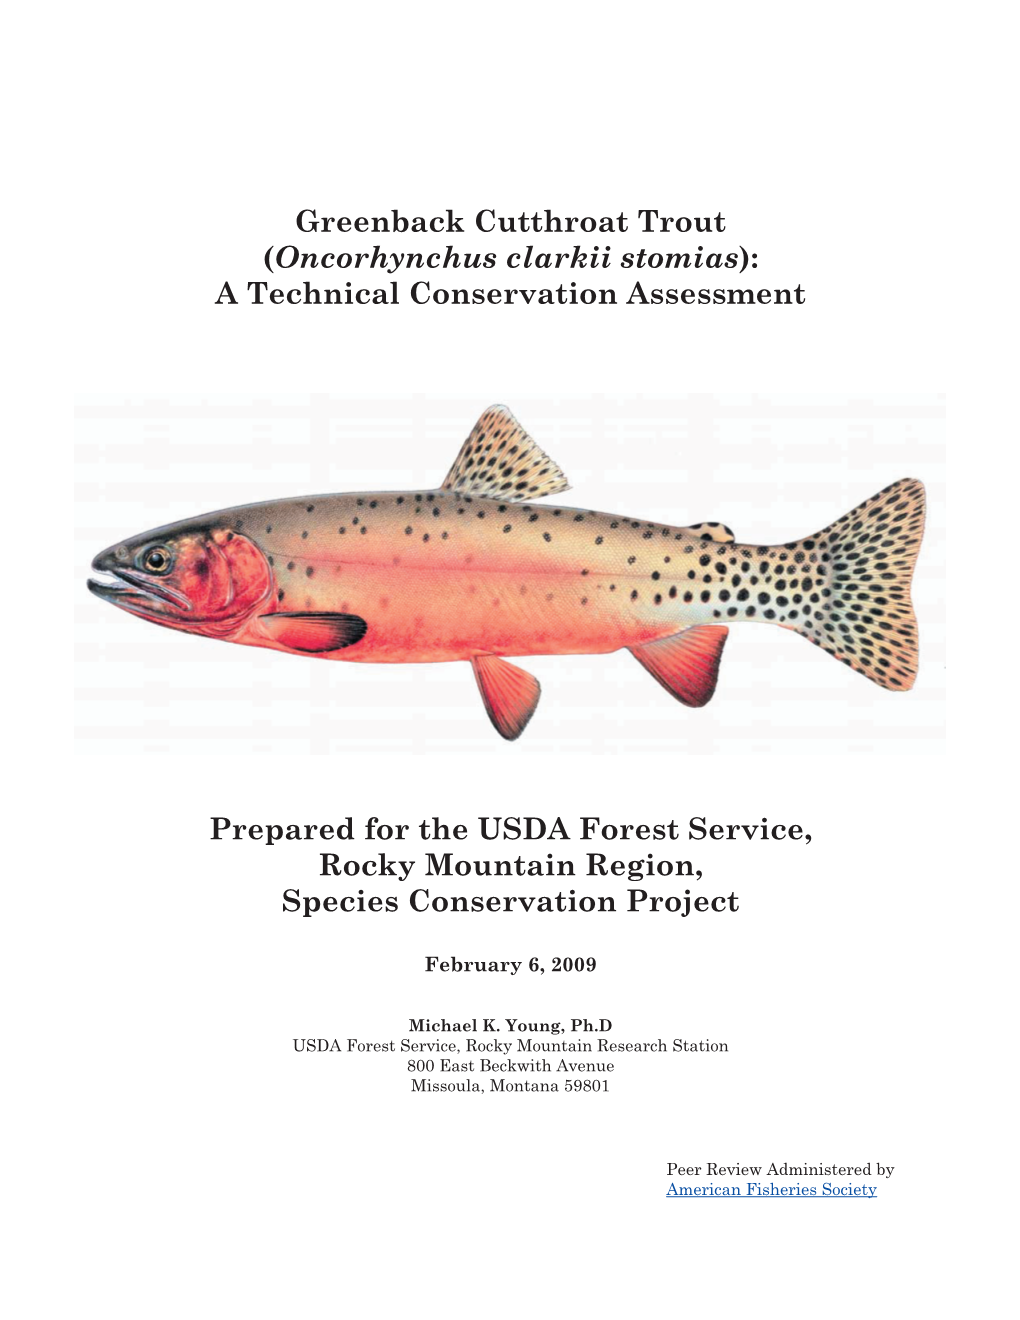 Greenback Cutthroat Trout (Oncorhynchus Clarkii Stomias): a Technical Conservation Assessment